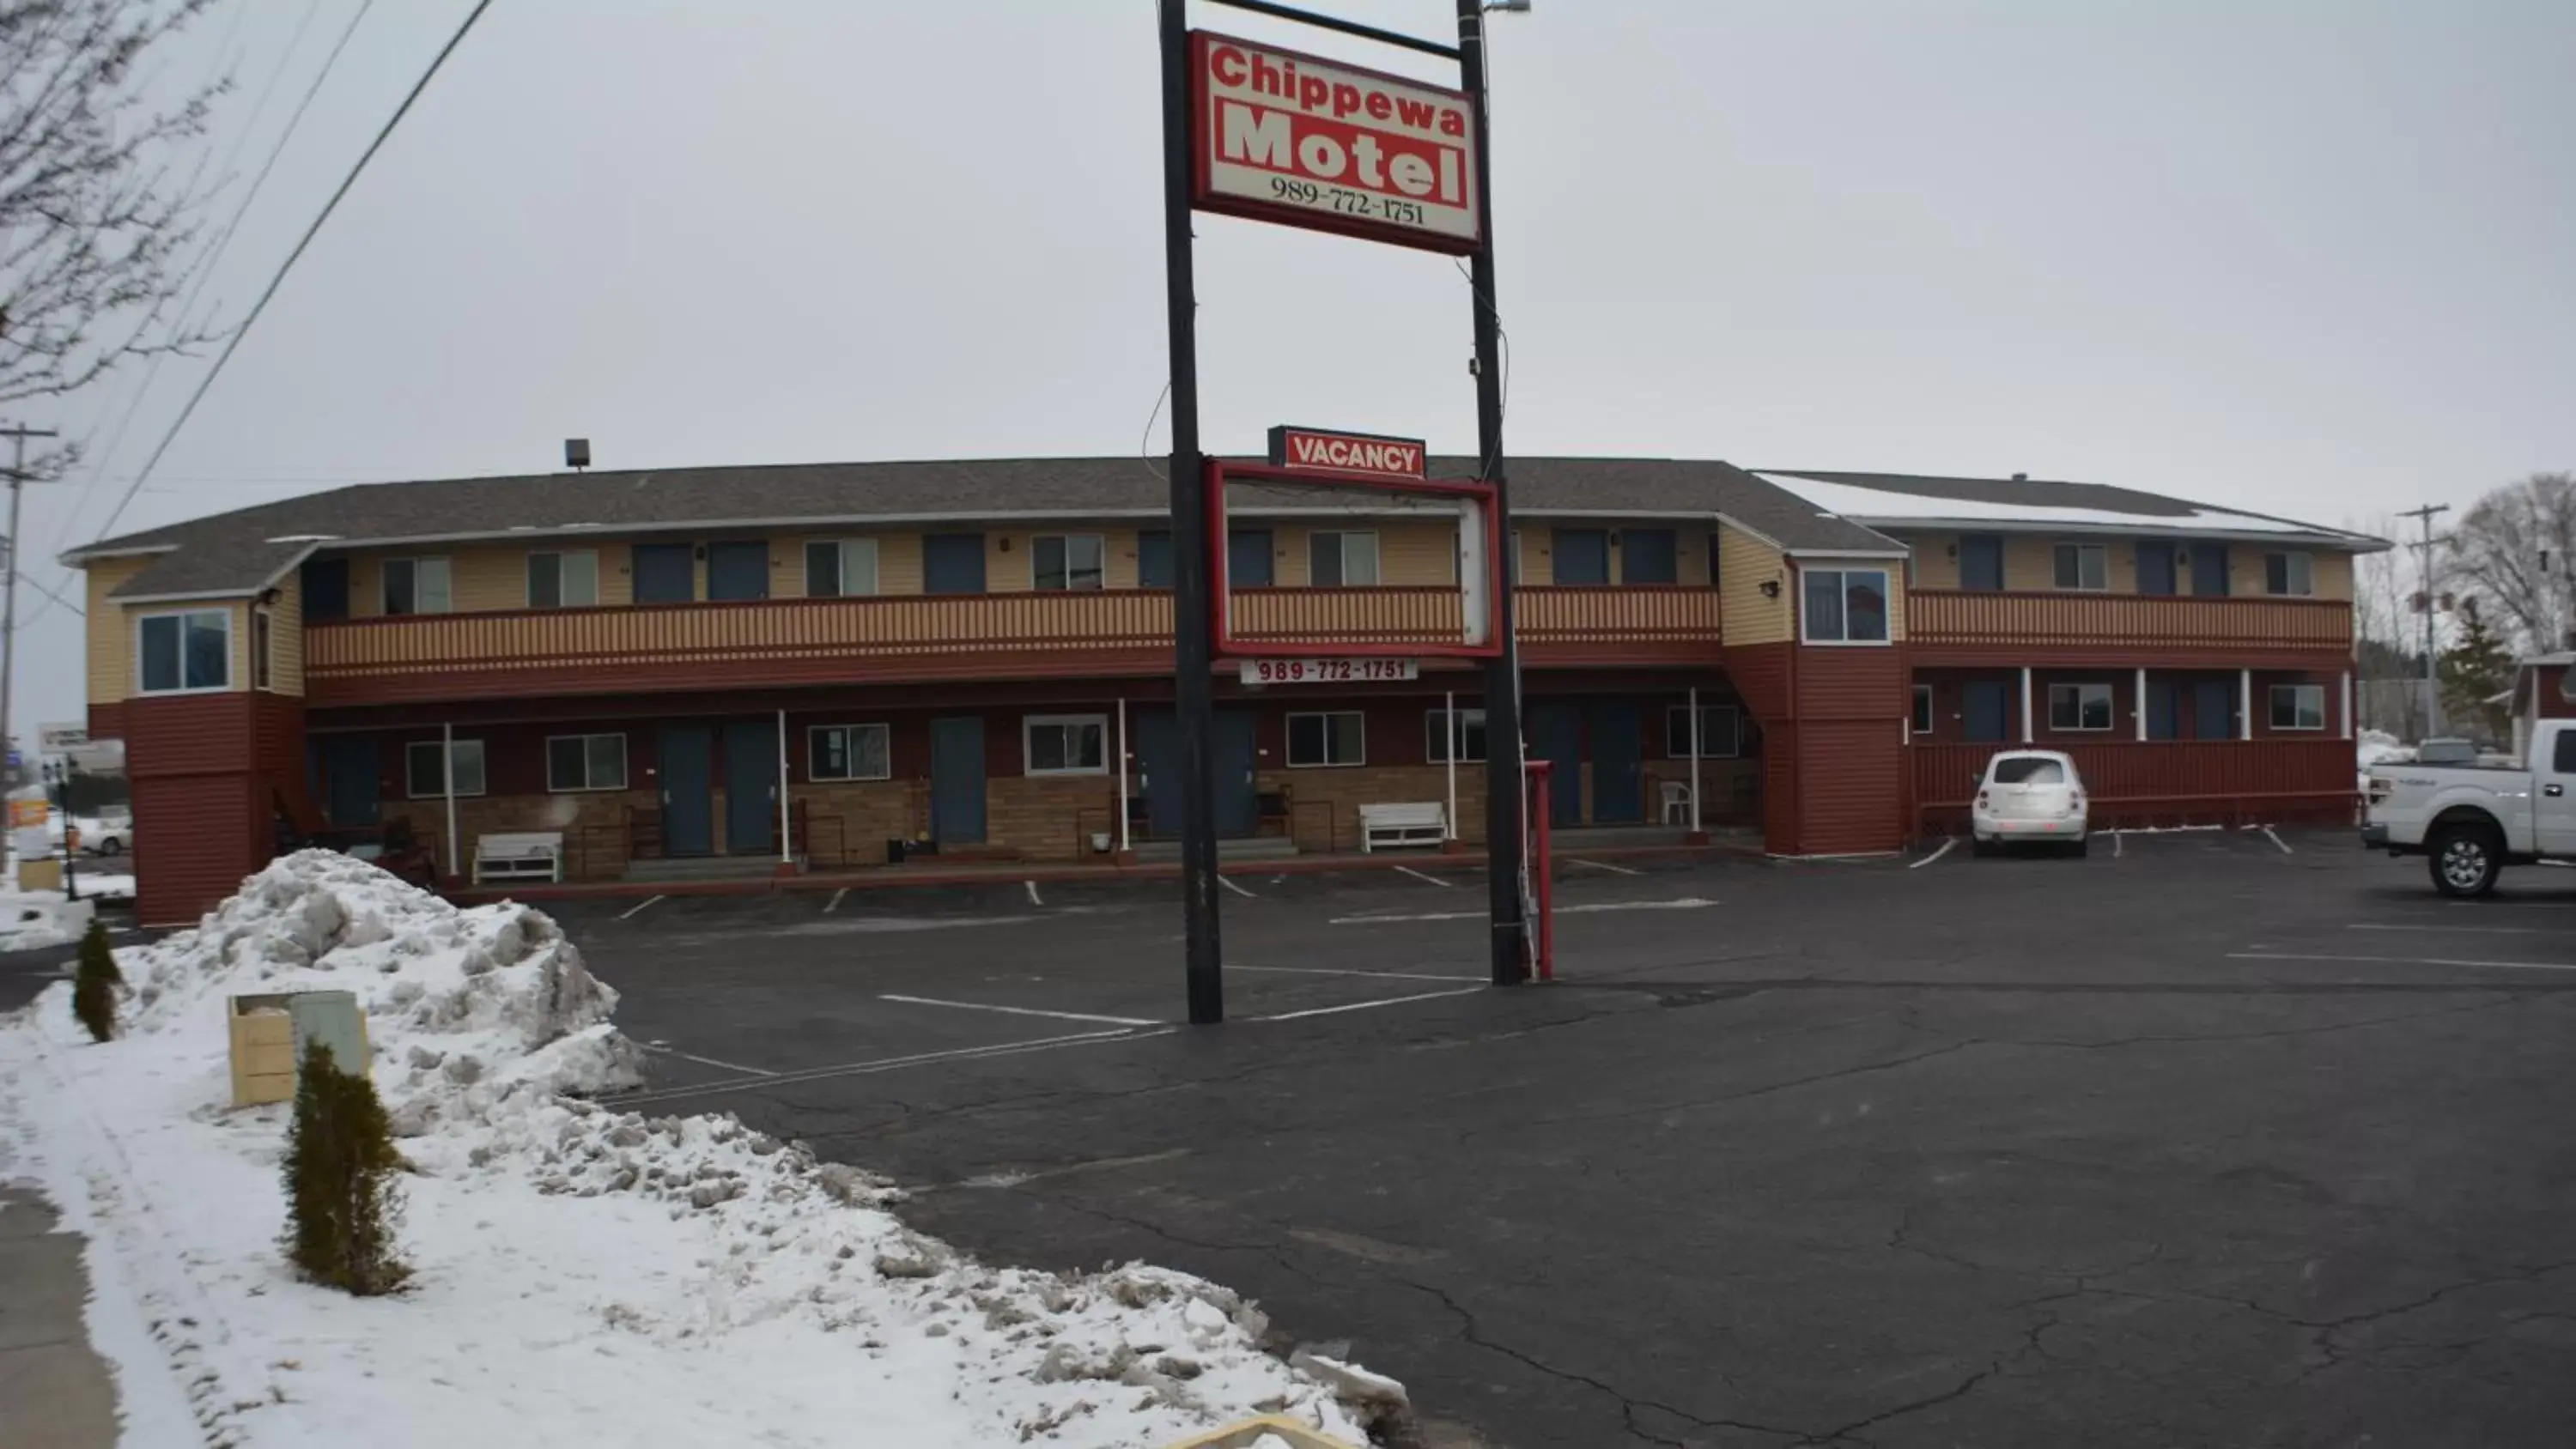 Property building in Chippewa Motel Mount Pleasant